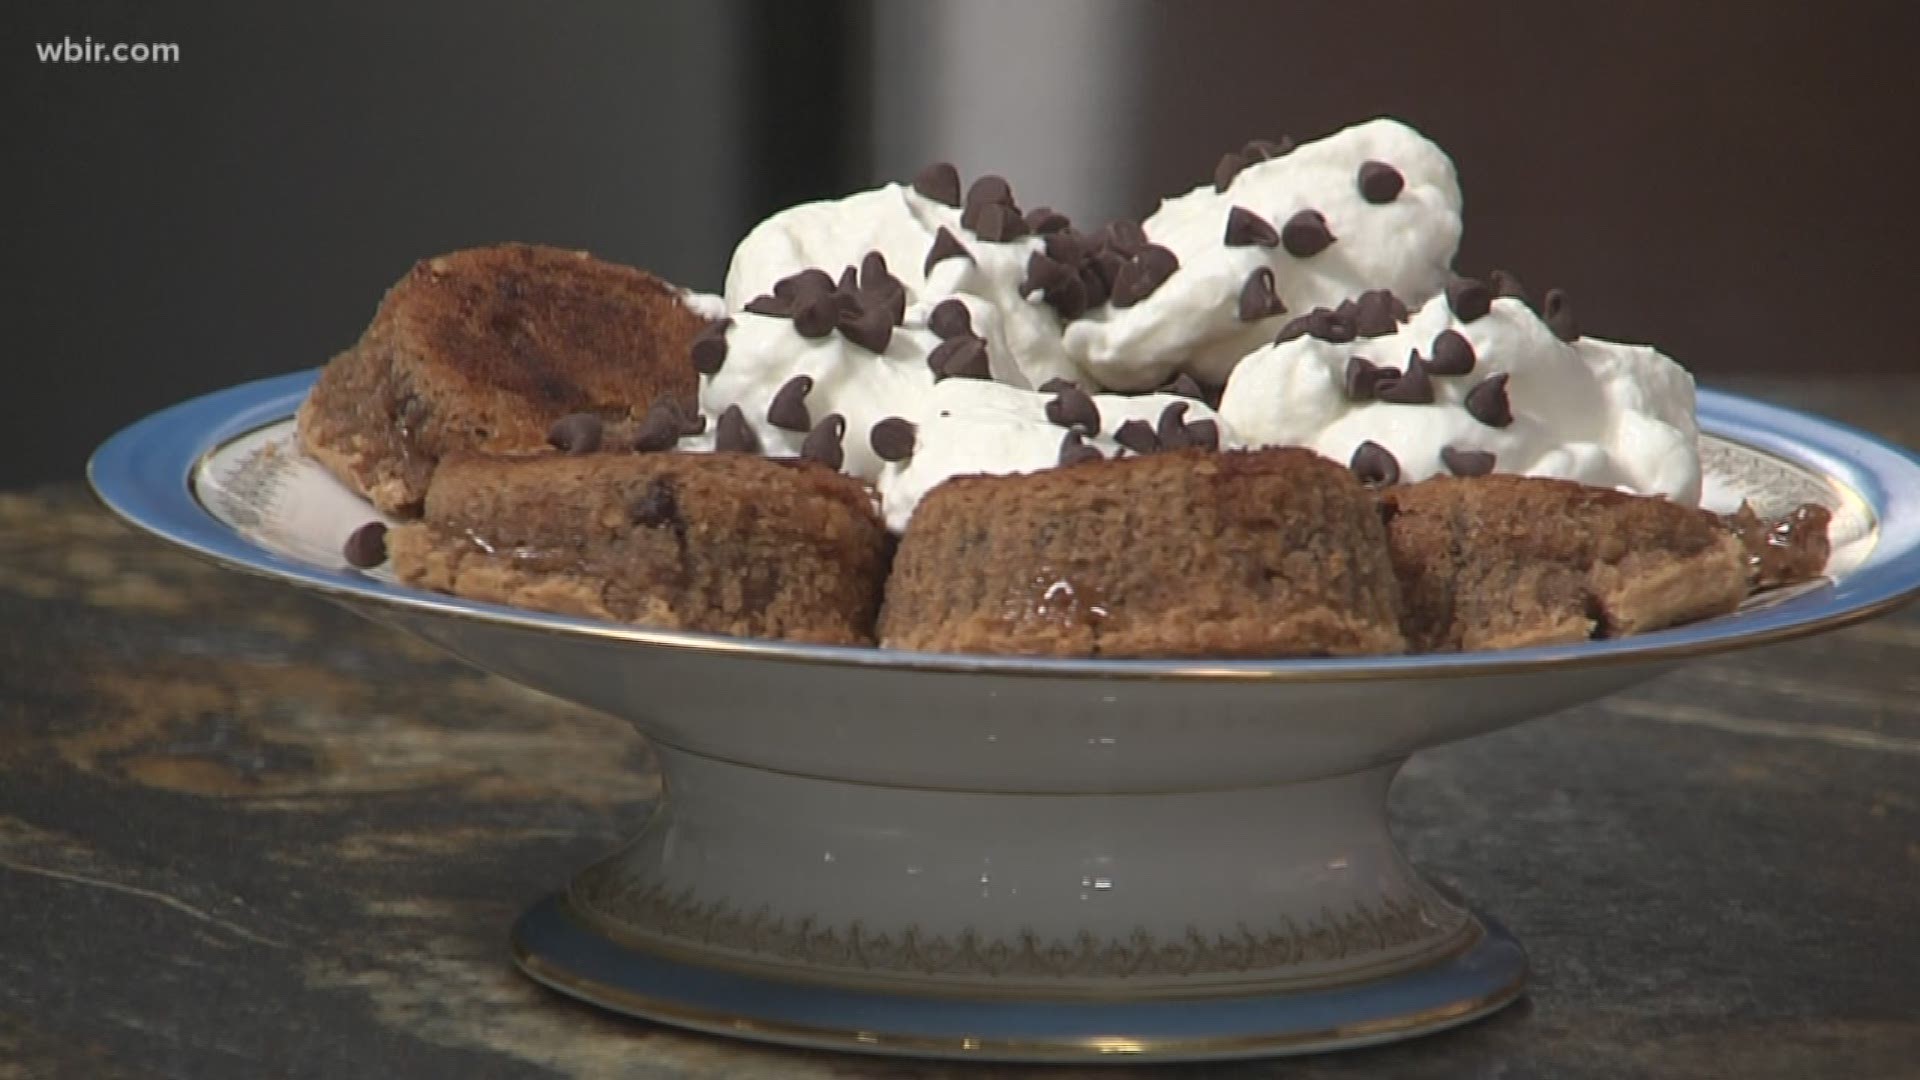 Michael with Glass Bazaar joins us today to teach us how to make these sweet treats.